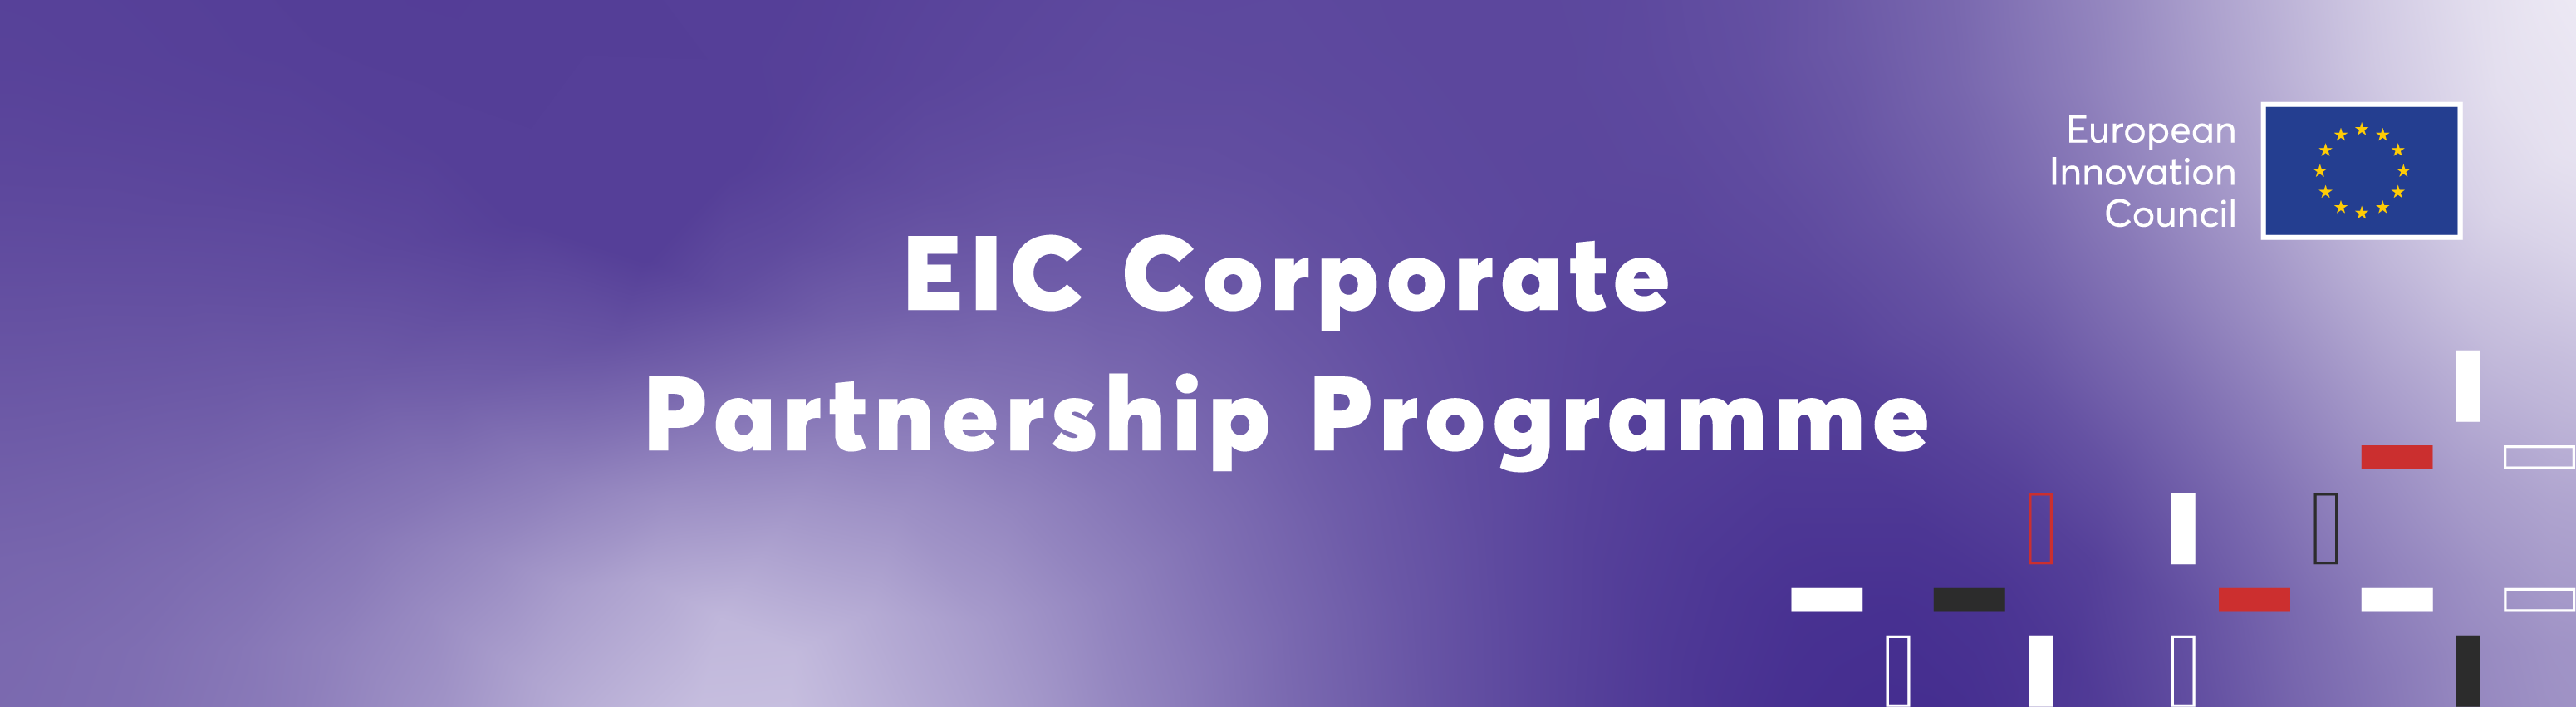 EIC Corporate Banner